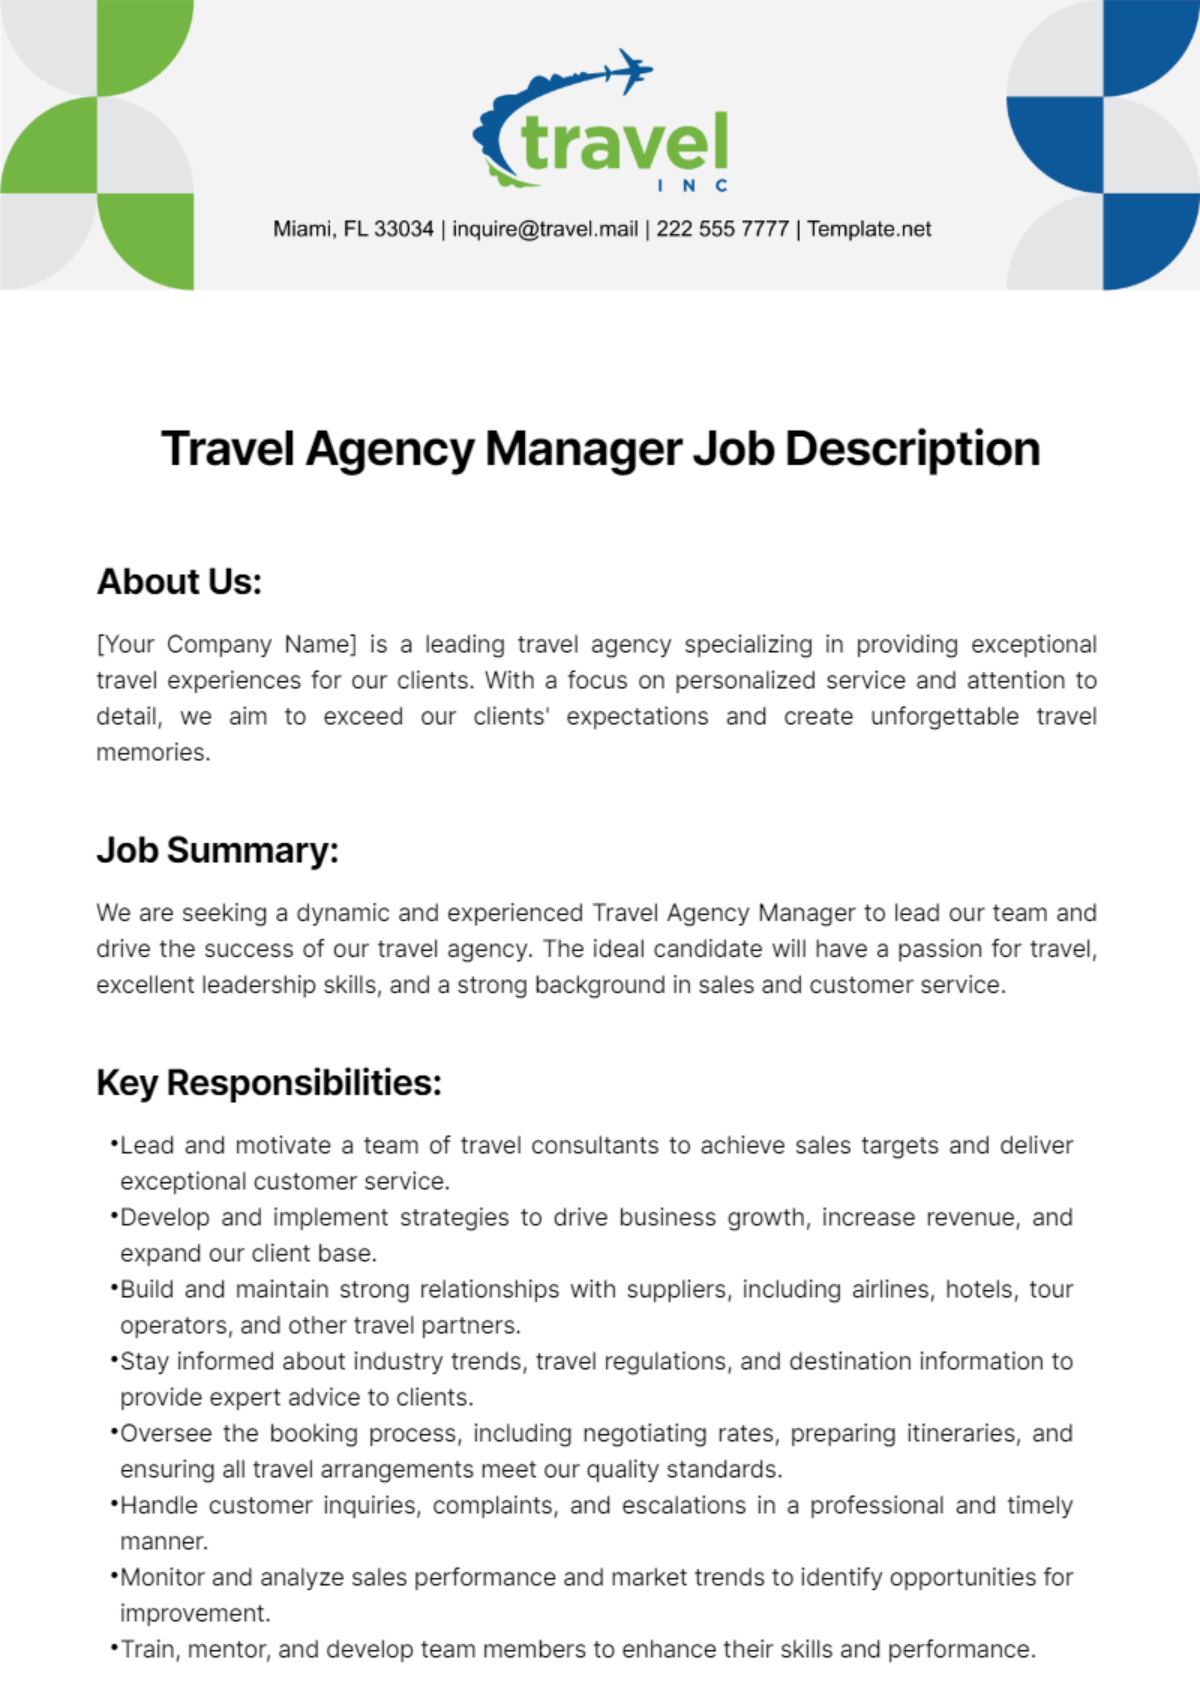 Free Travel Agency Manager Job Description Template